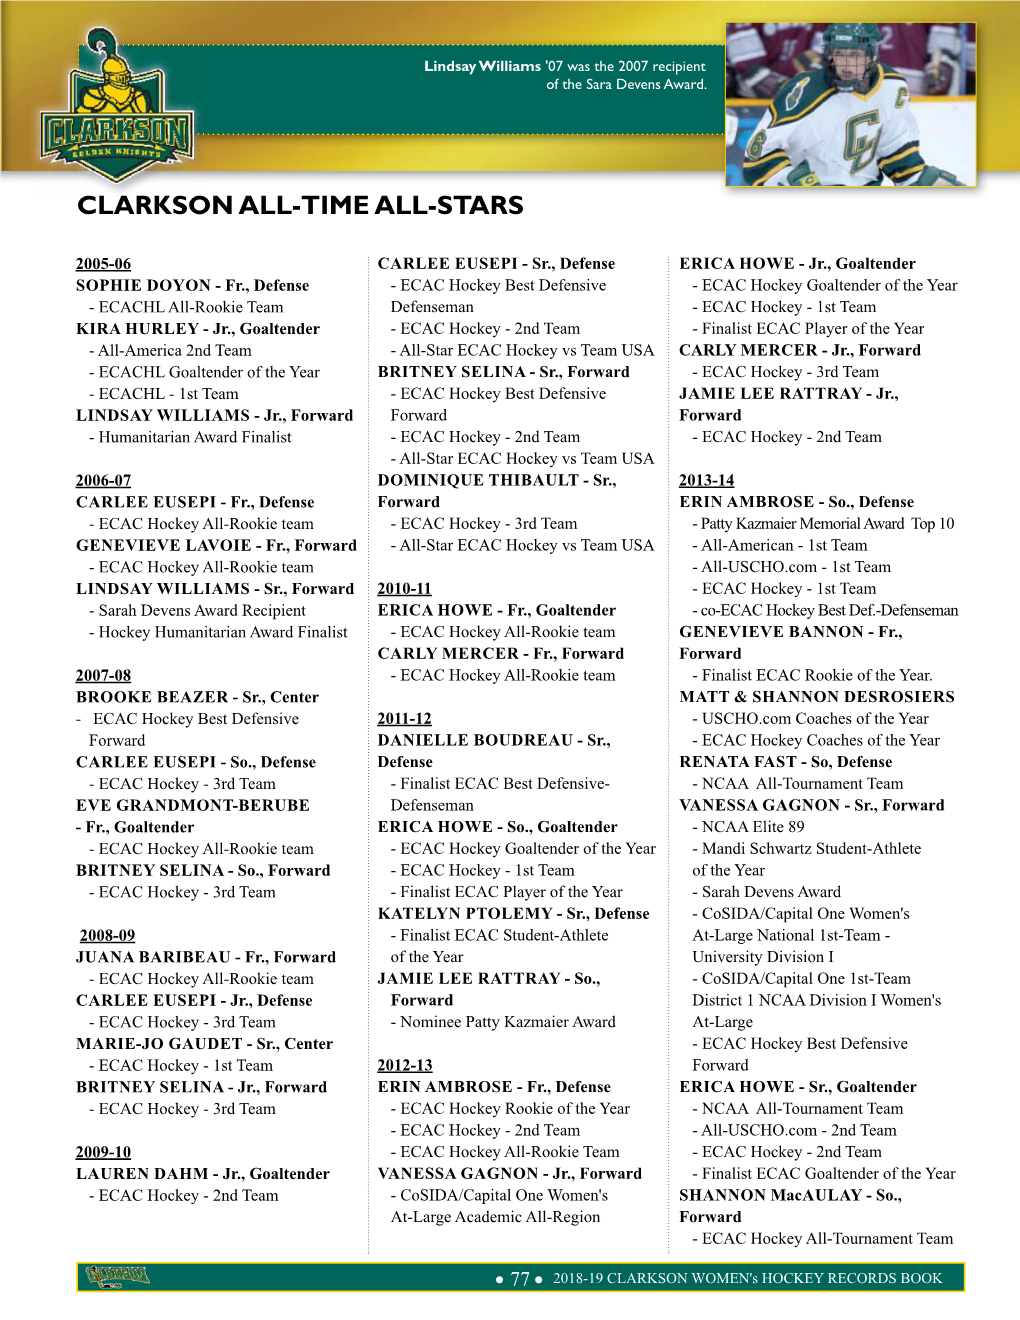 Clarkson All-Time All-Stars